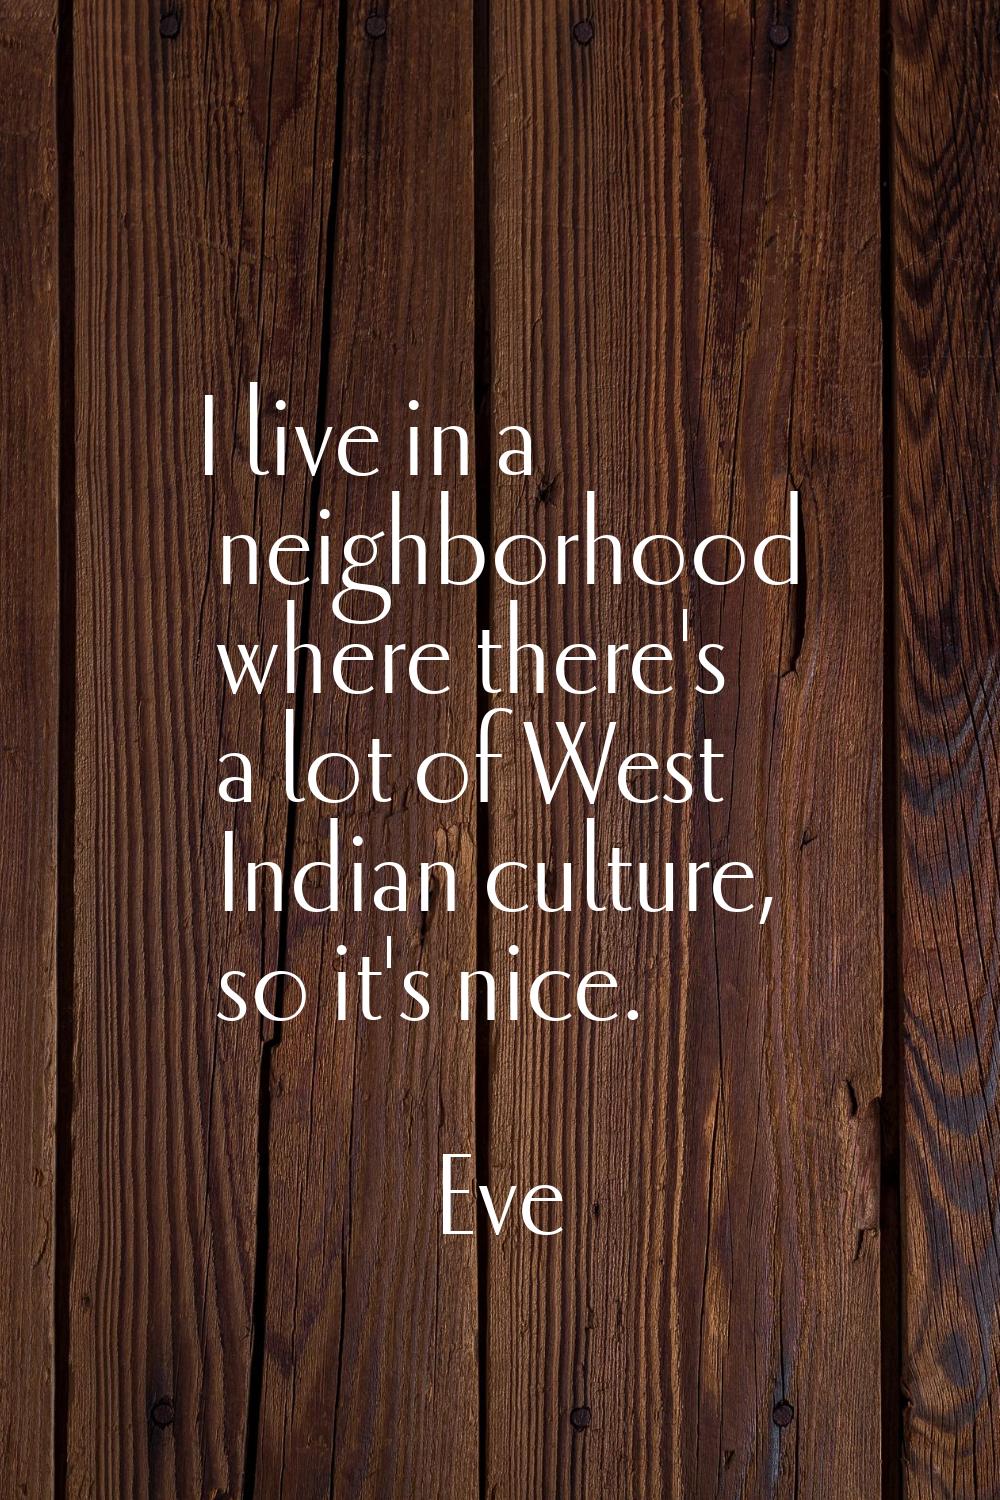 I live in a neighborhood where there's a lot of West Indian culture, so it's nice.